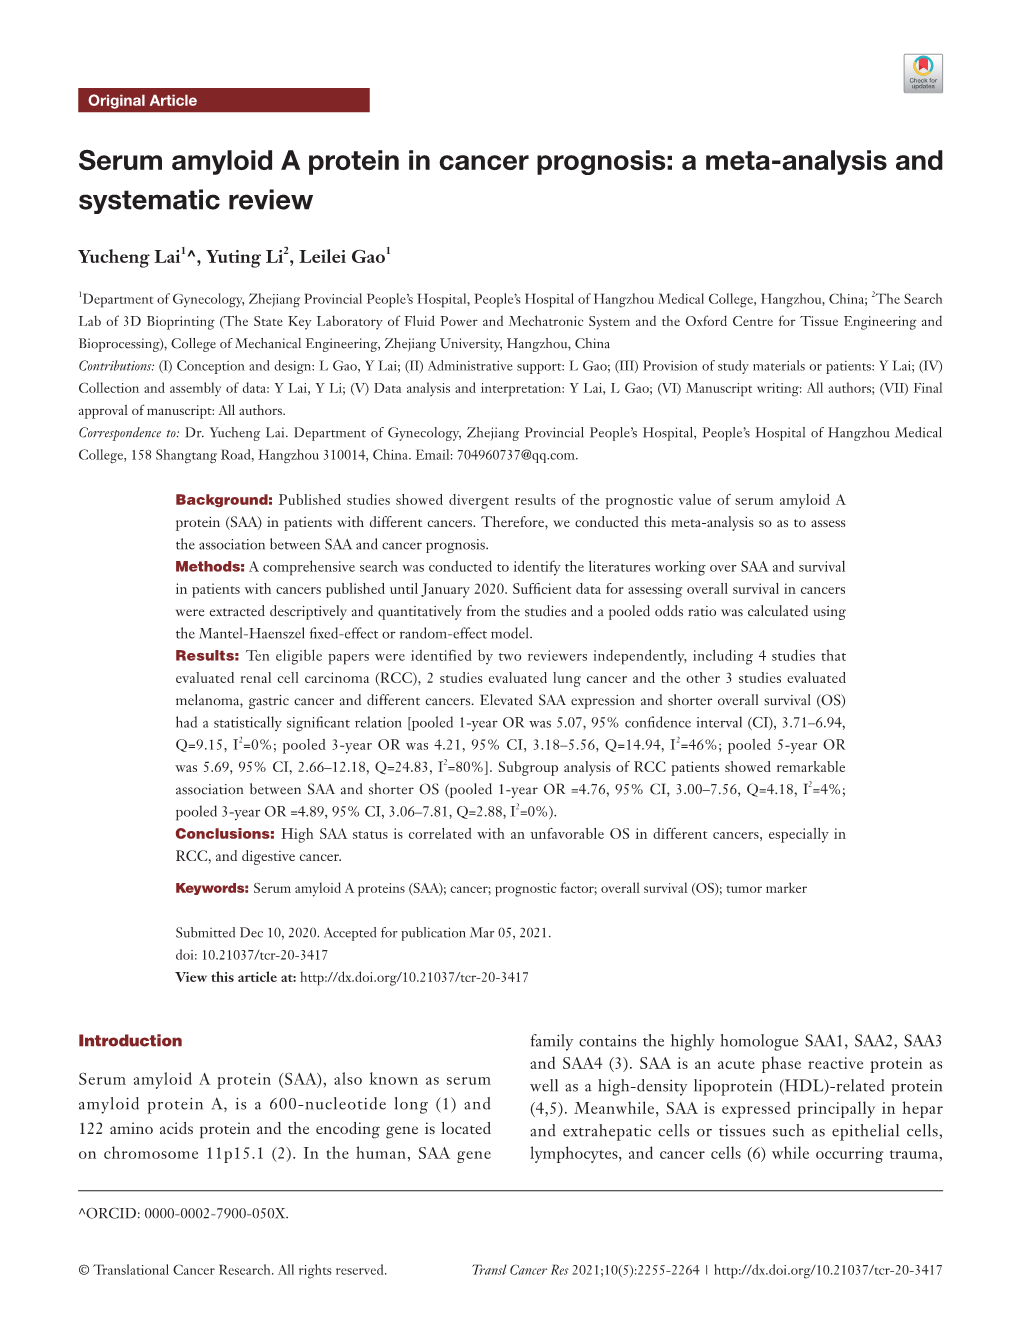 Serum Amyloid a Protein in Cancer Prognosis: a Meta-Analysis and Systematic Review